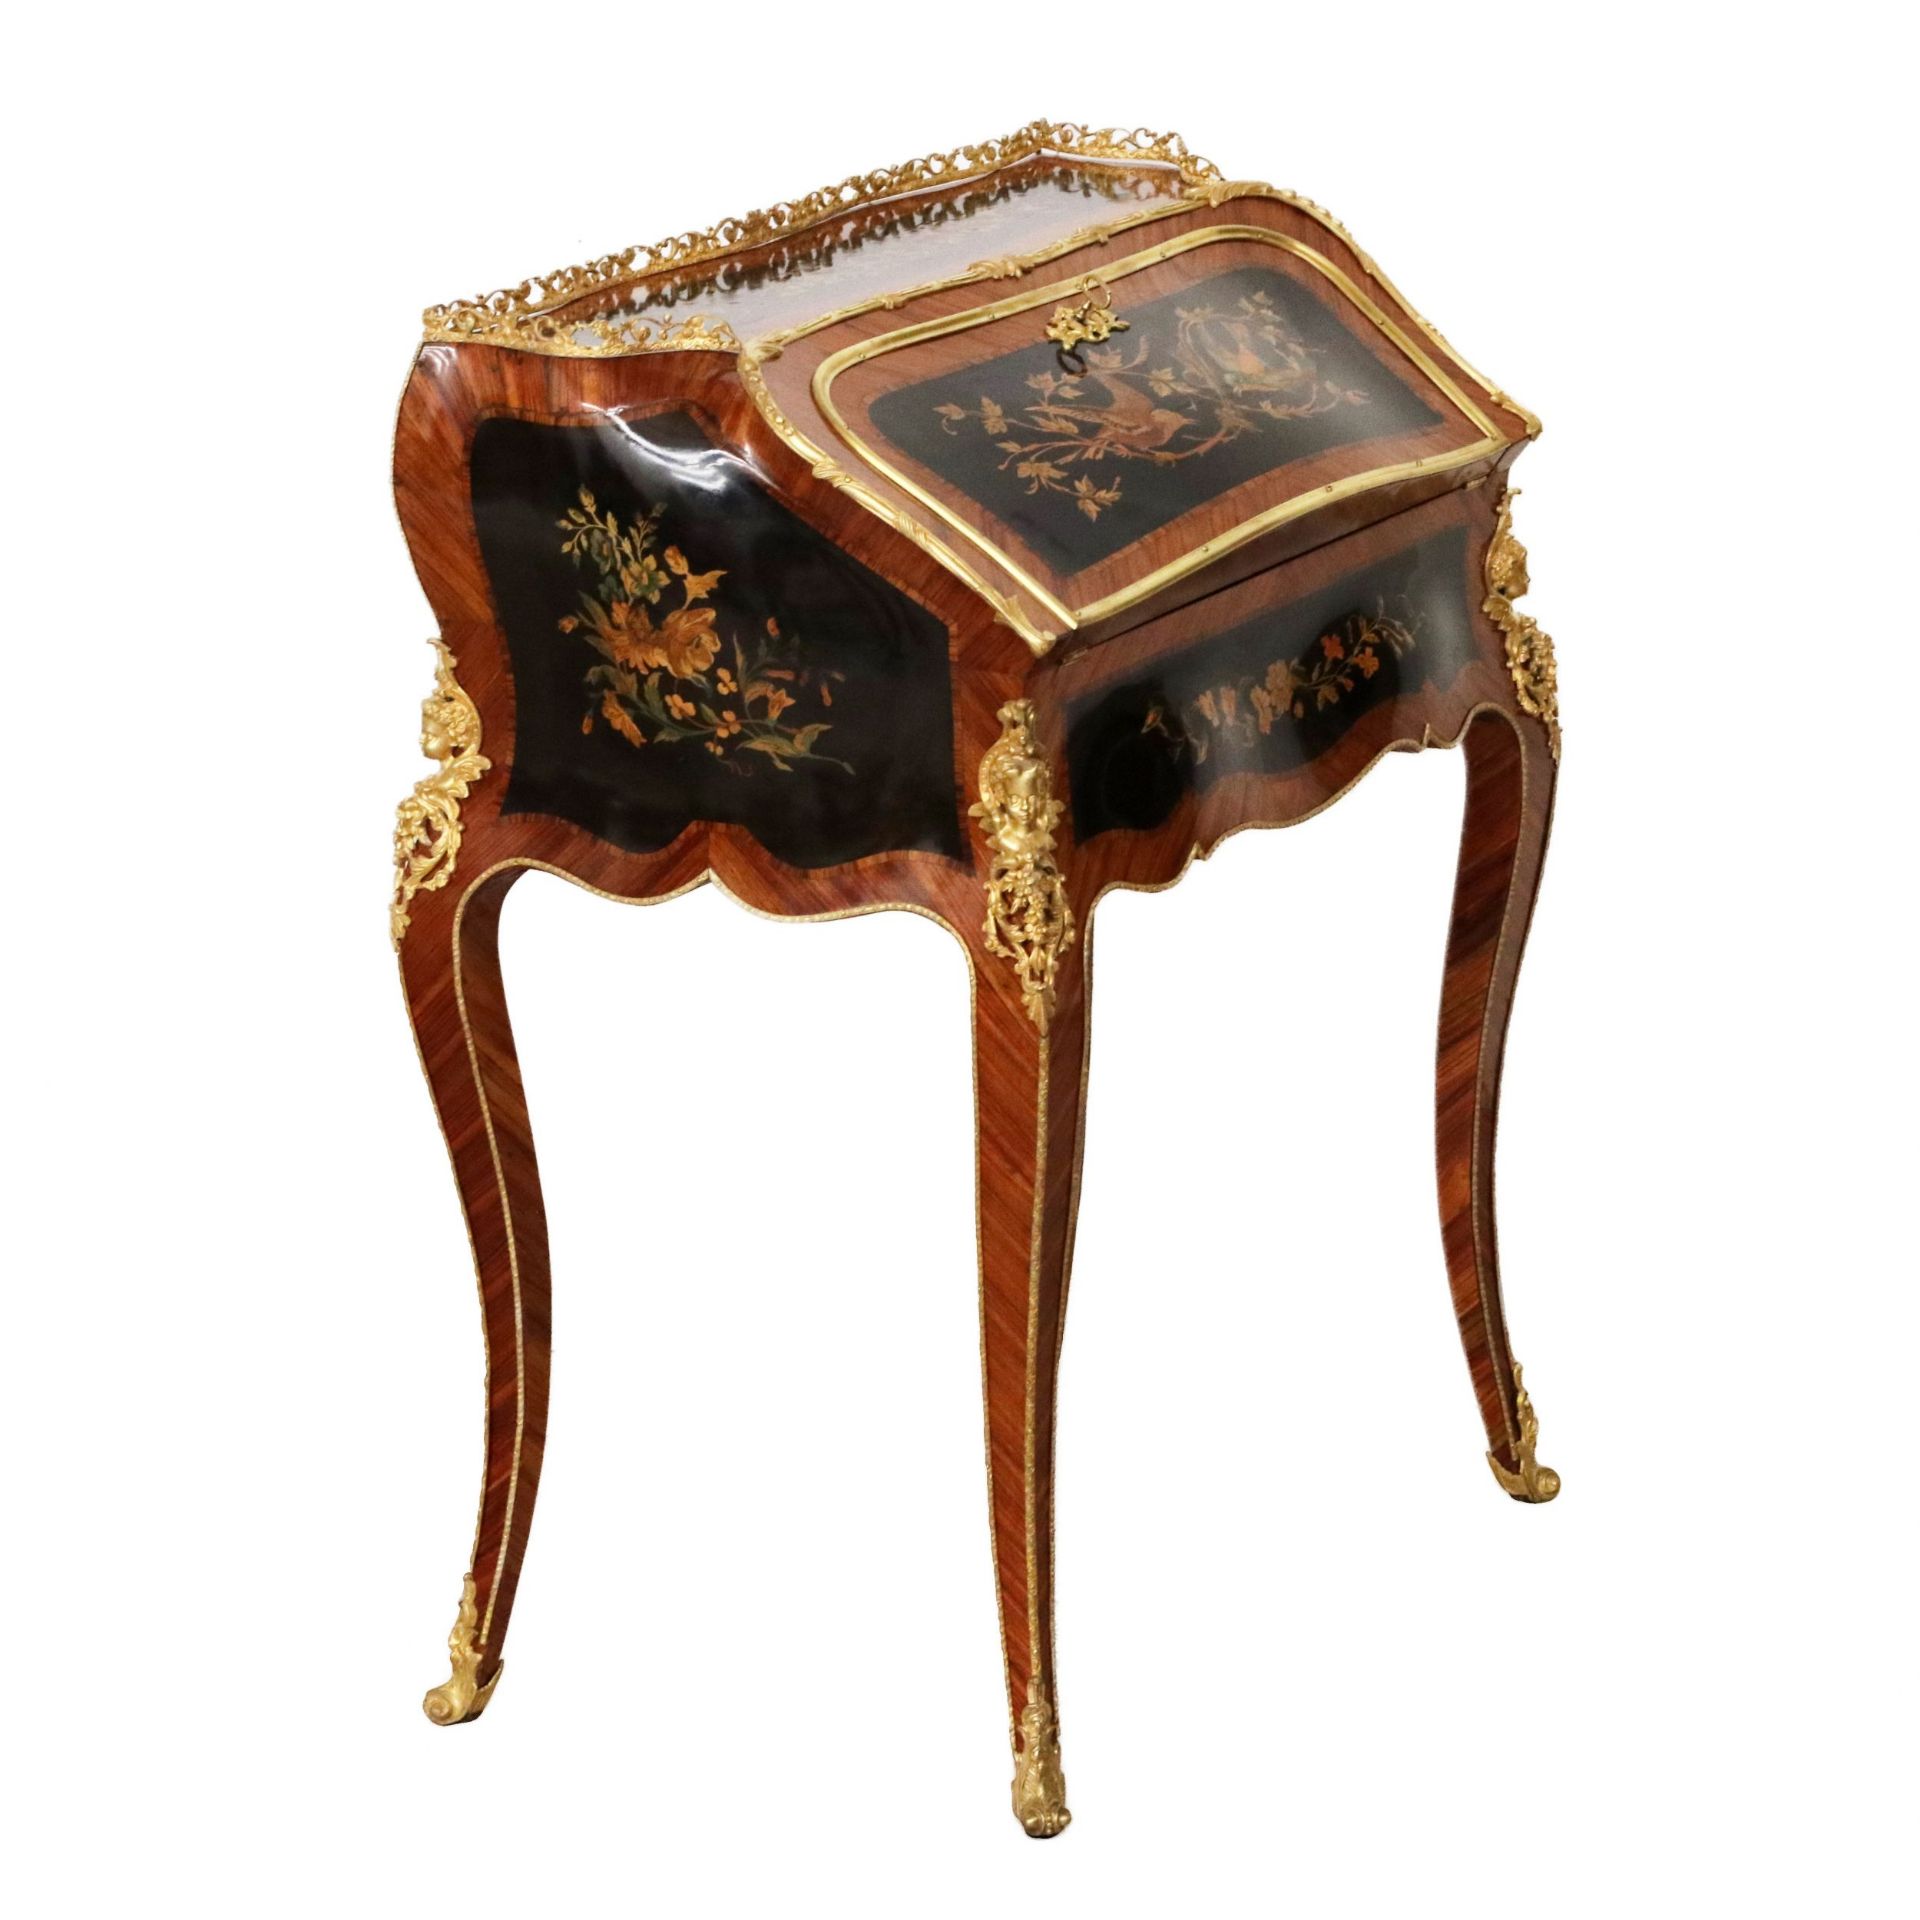 Coquettish ladies` bureau in wood and gilded bronze, Louis XV style. - Image 2 of 11